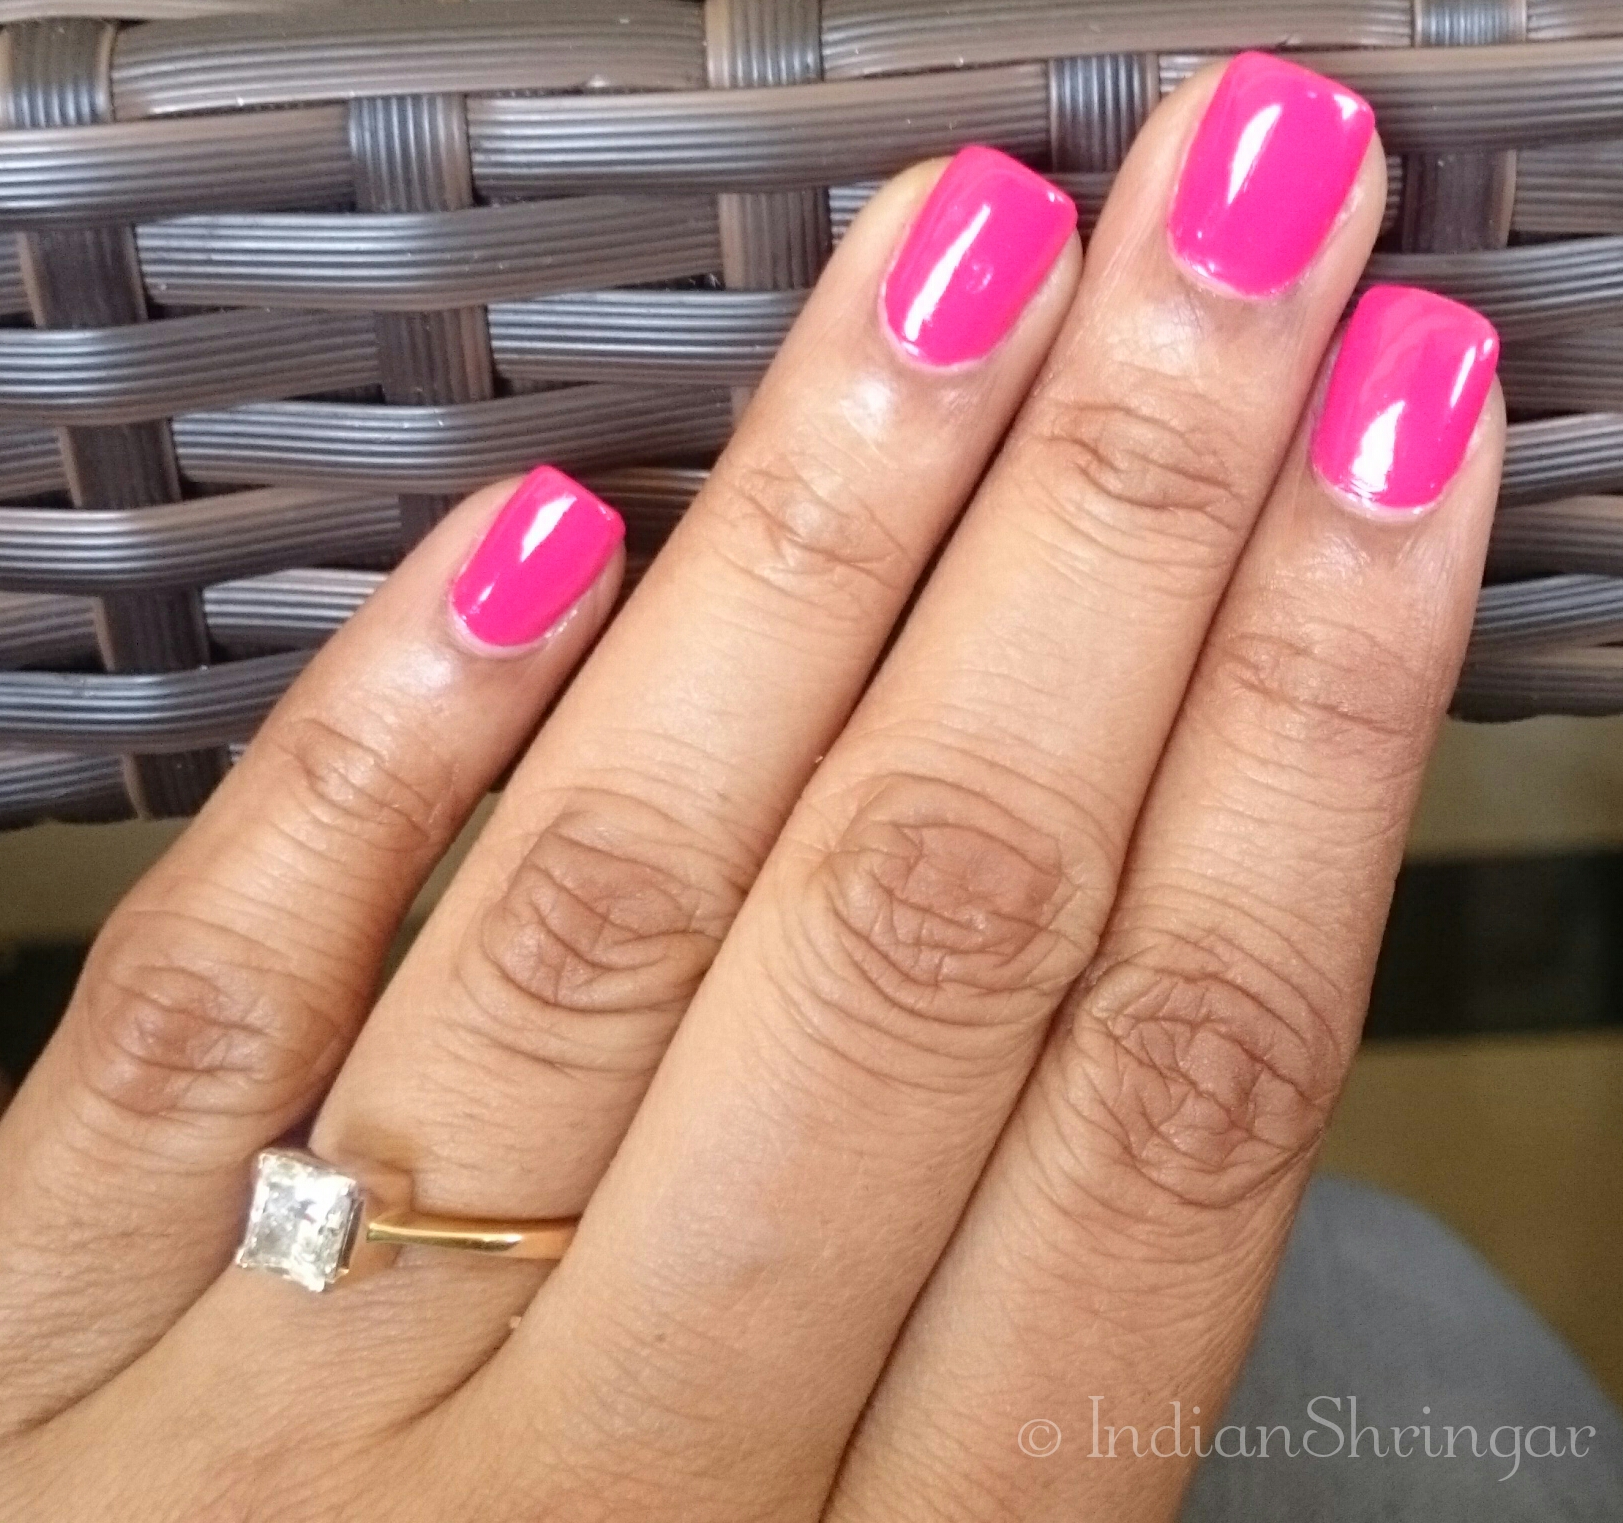 All About Gel Nails - The Procedure and The Misconceptions | The Bombay ...